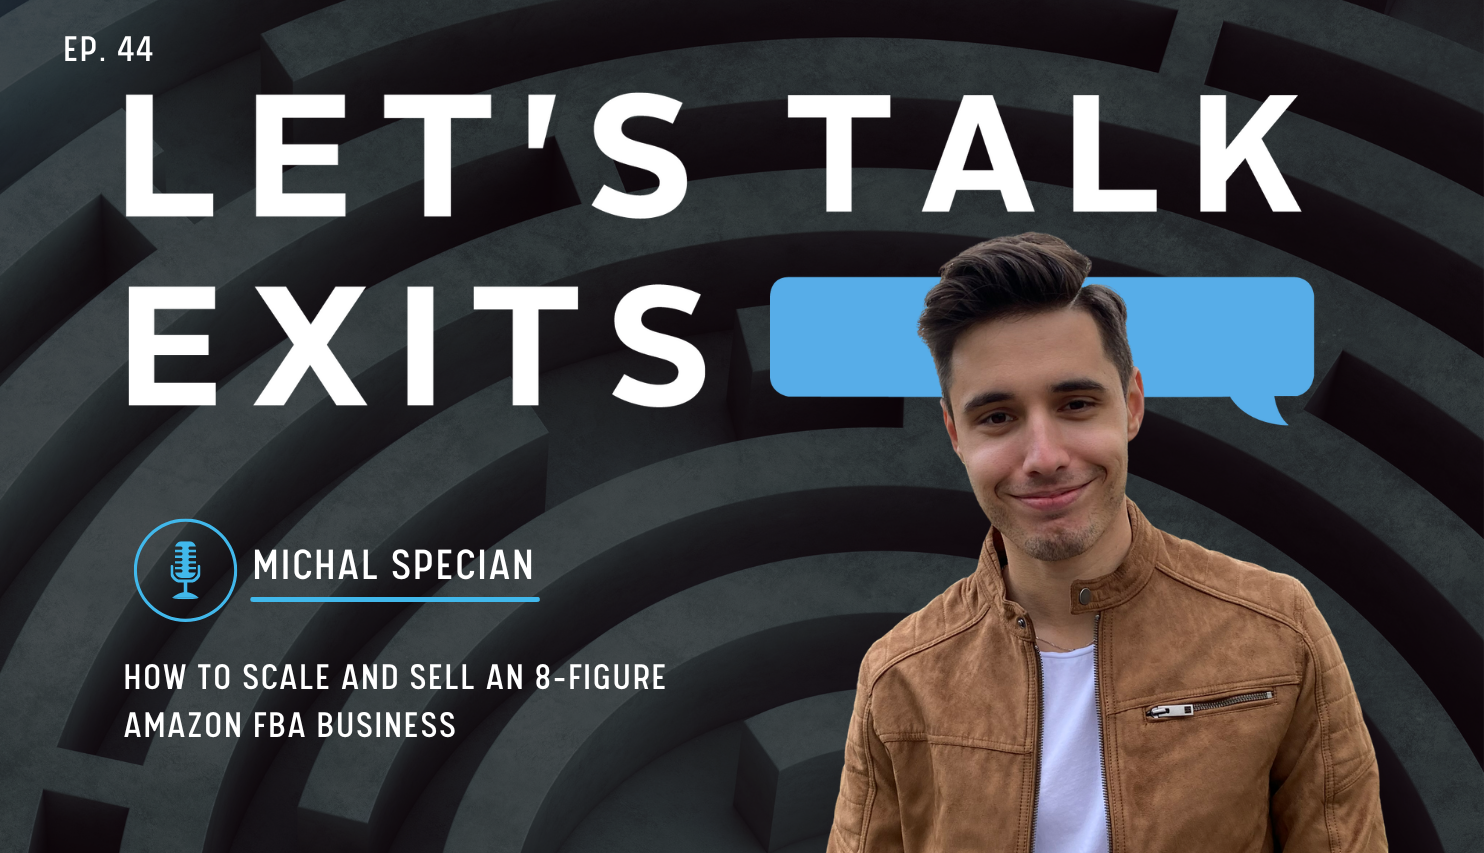 How to Scale and Sell an 8-Figure Amazon FBA Business with Michal Specian